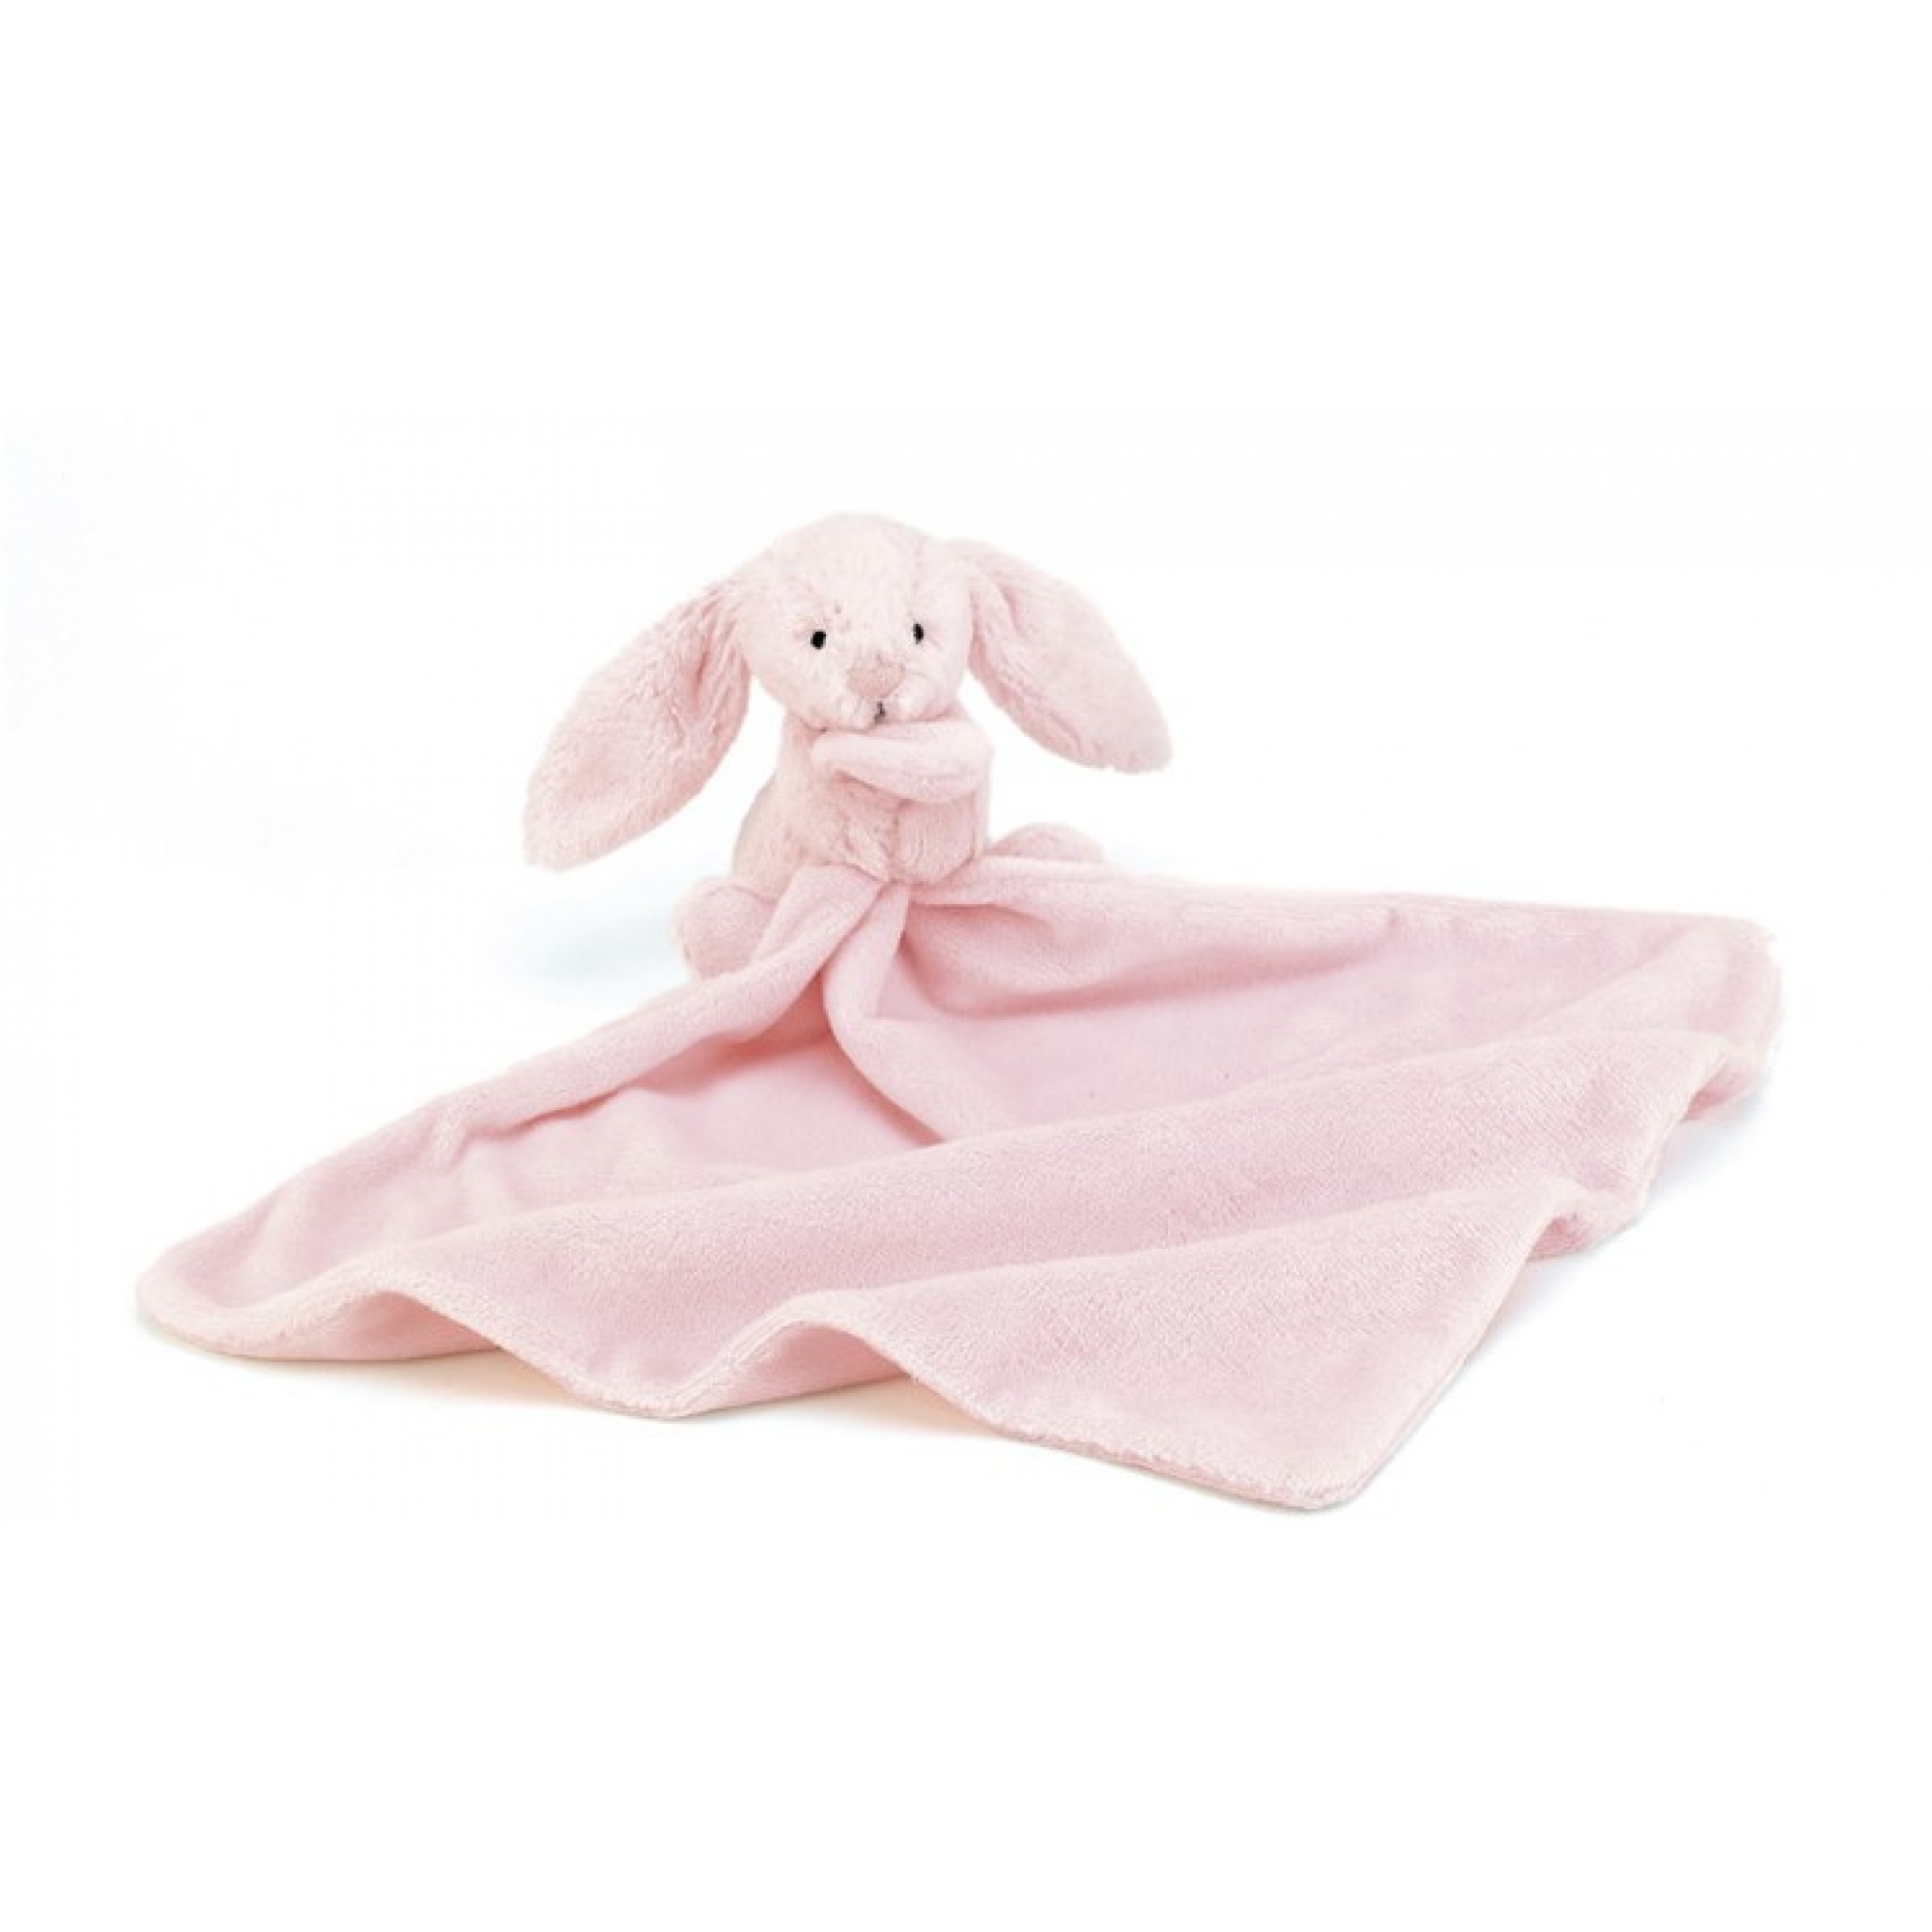 bashful-pink-bunny-soother-jellycat_OA